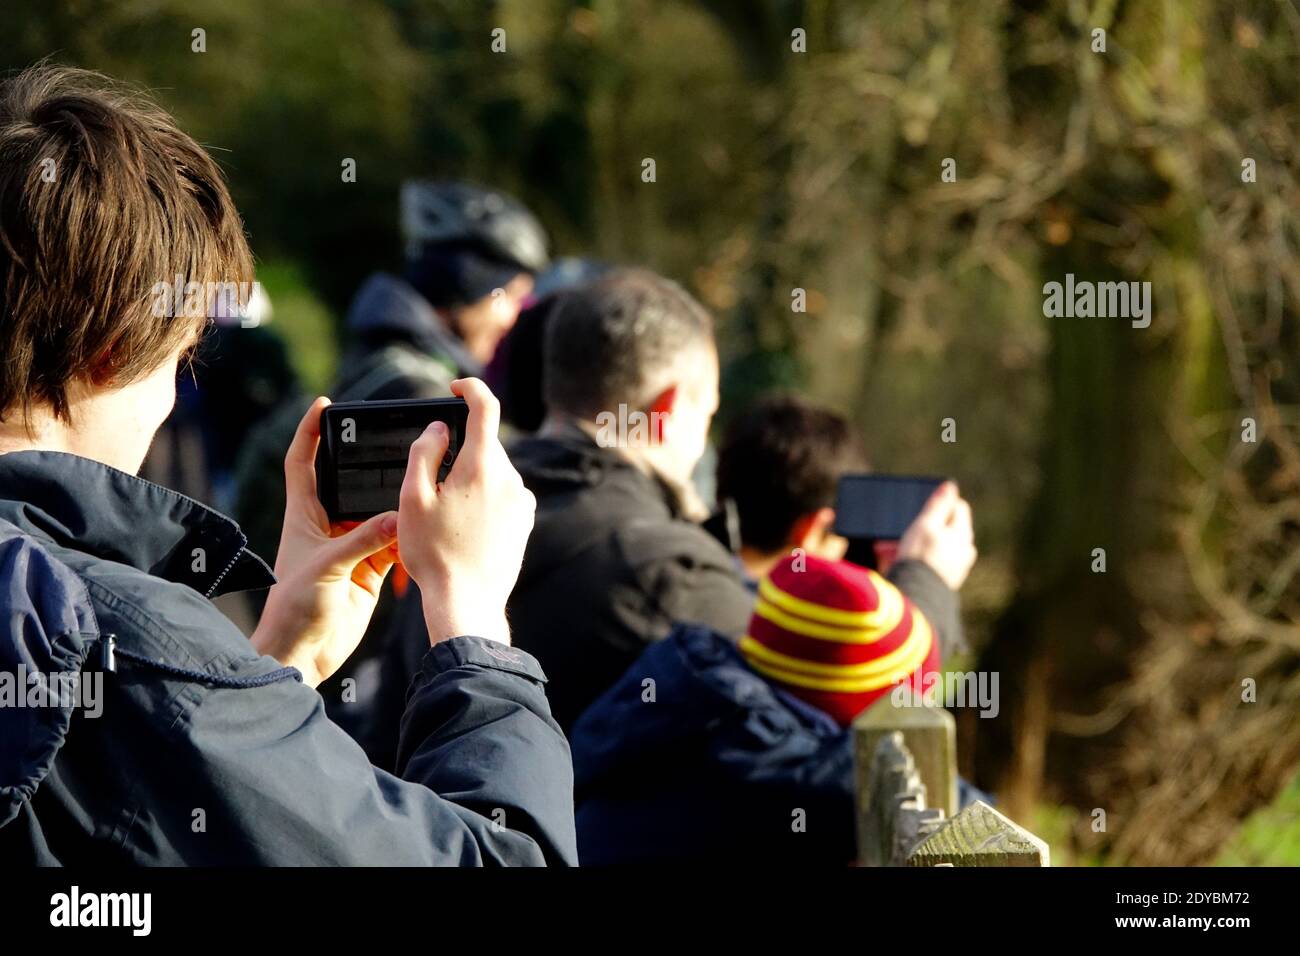 Spectators at Hampstead Men’s Pond take photos on smartphone of Annual Christmas swimming event Christmas Day 2020 Stock Photo